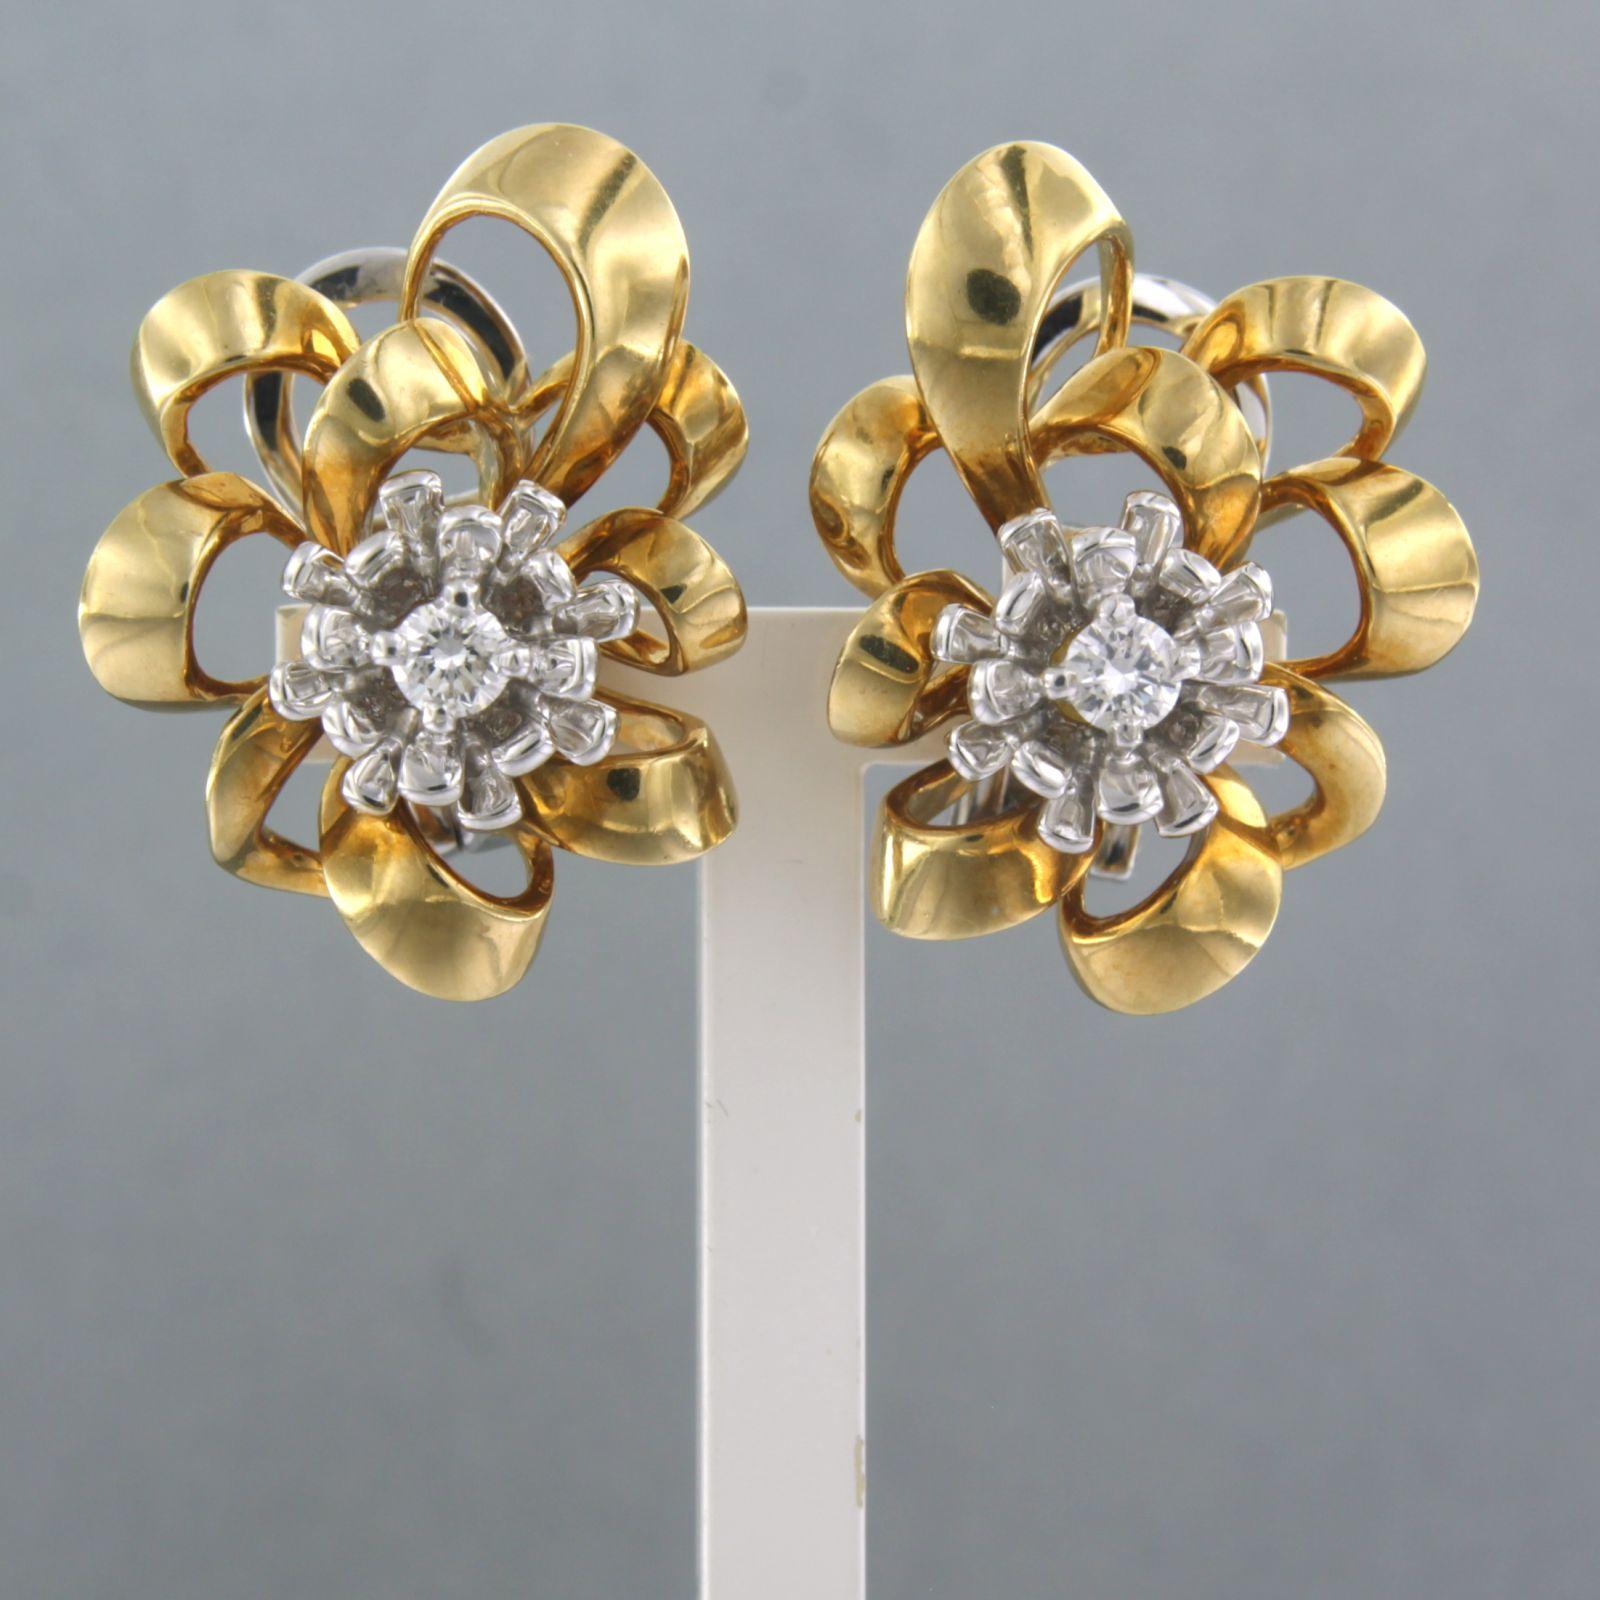 GOLD BAUER - 18k bicolour gold ear clips set with brilliant cut diamonds up to. 0.29ct - F/G – VS/SI

Detailed description:

the size of the ear clip is 2.5 cm high by 2.0 cm wide

Total weight 18.3 grams

set with

- 2 x 3.3 mm brilliant cut